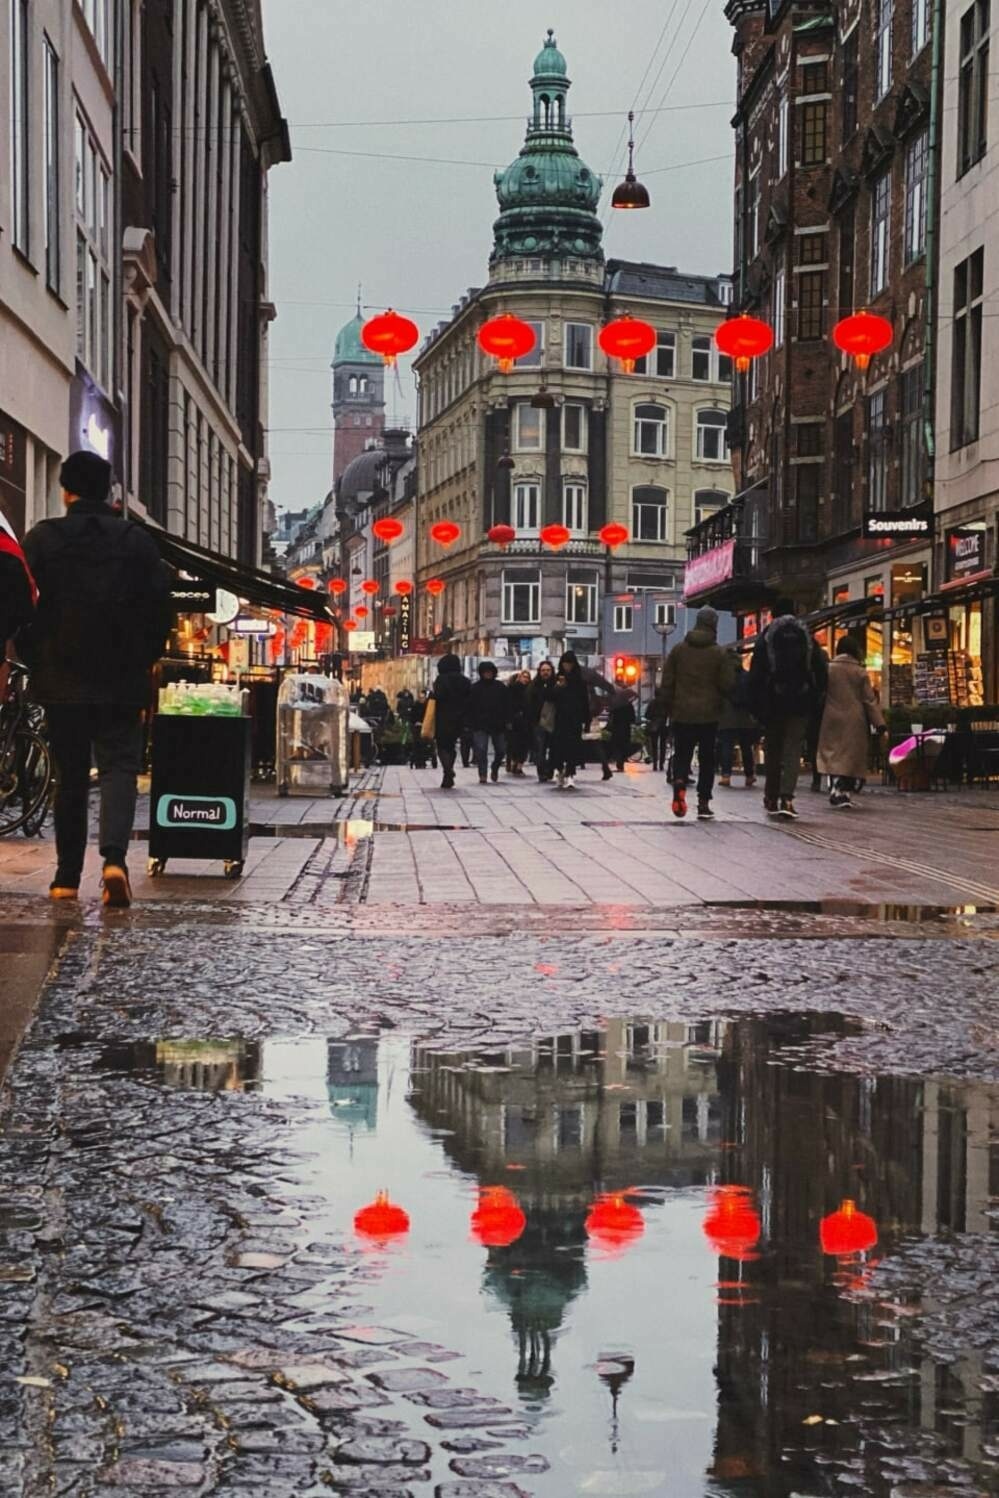 A pedrestrian street with puddles reflecting the red Chinese lantens hung overhead.